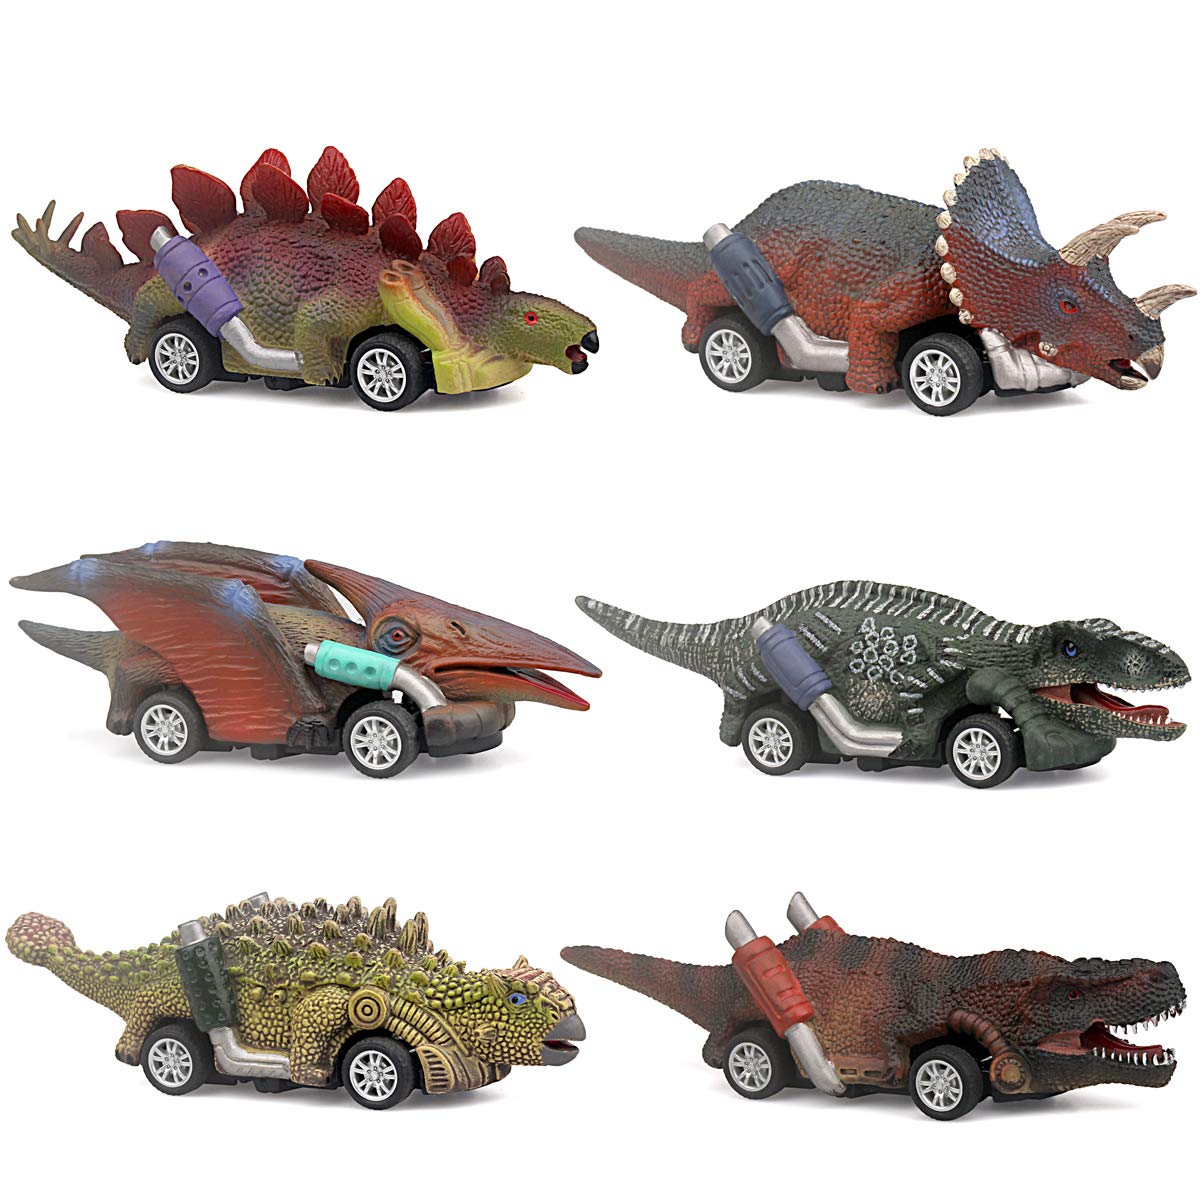 Dinosaur Toy car,boy Toys Age 3 to 12 Toy Dinosaur 5.3 Inch Toys for 3,4,5,6,7,8,9,10,11,12 Year Old Boys Full-Form Dino car Toy,6 Pack